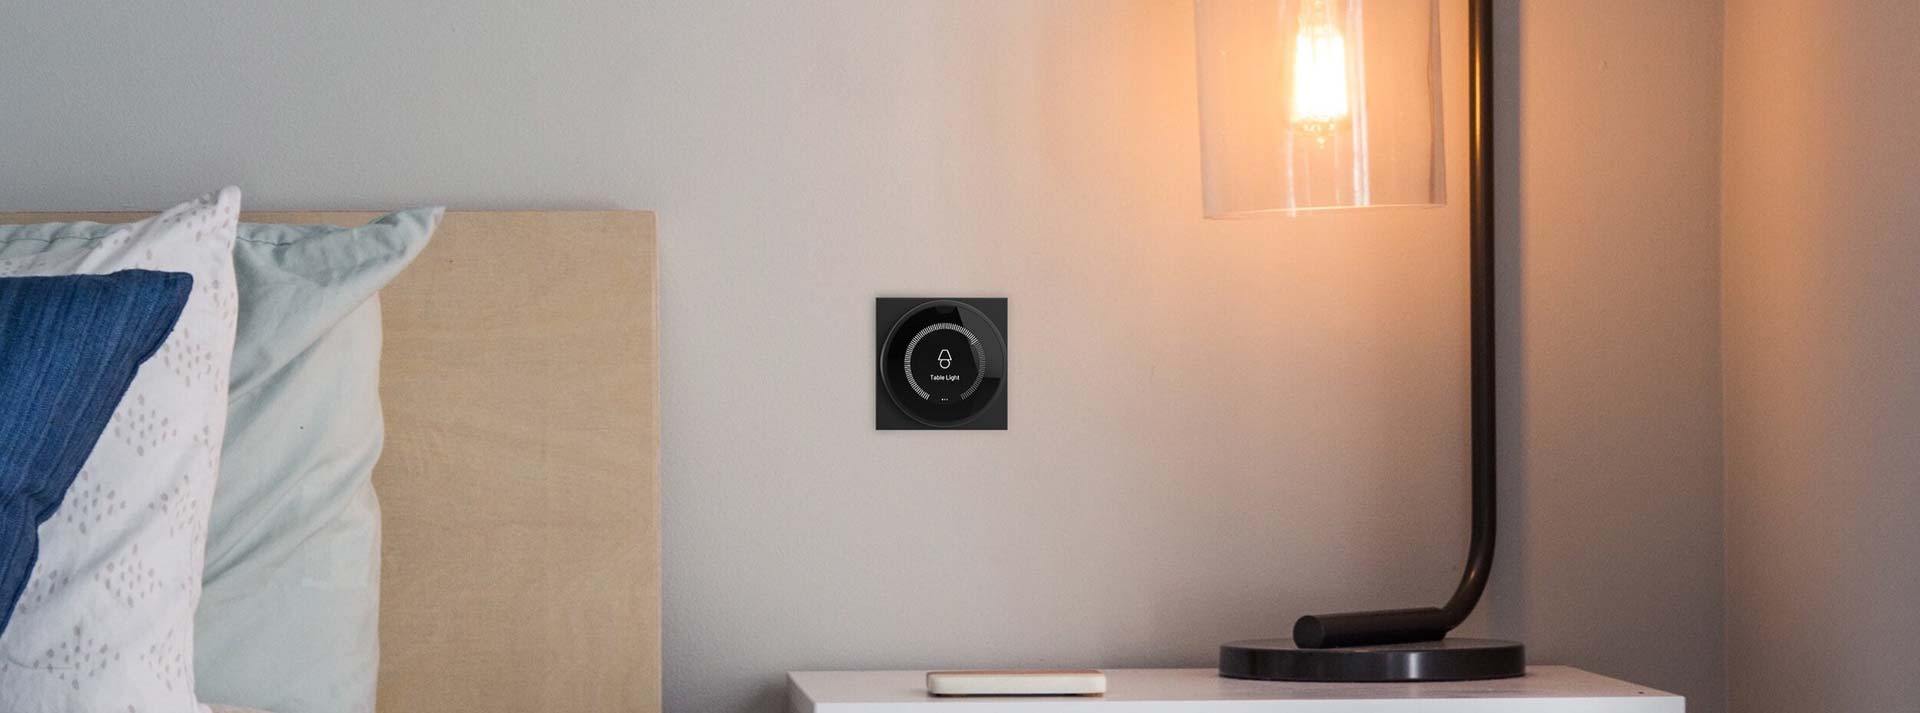 Room Controller - Led Turate